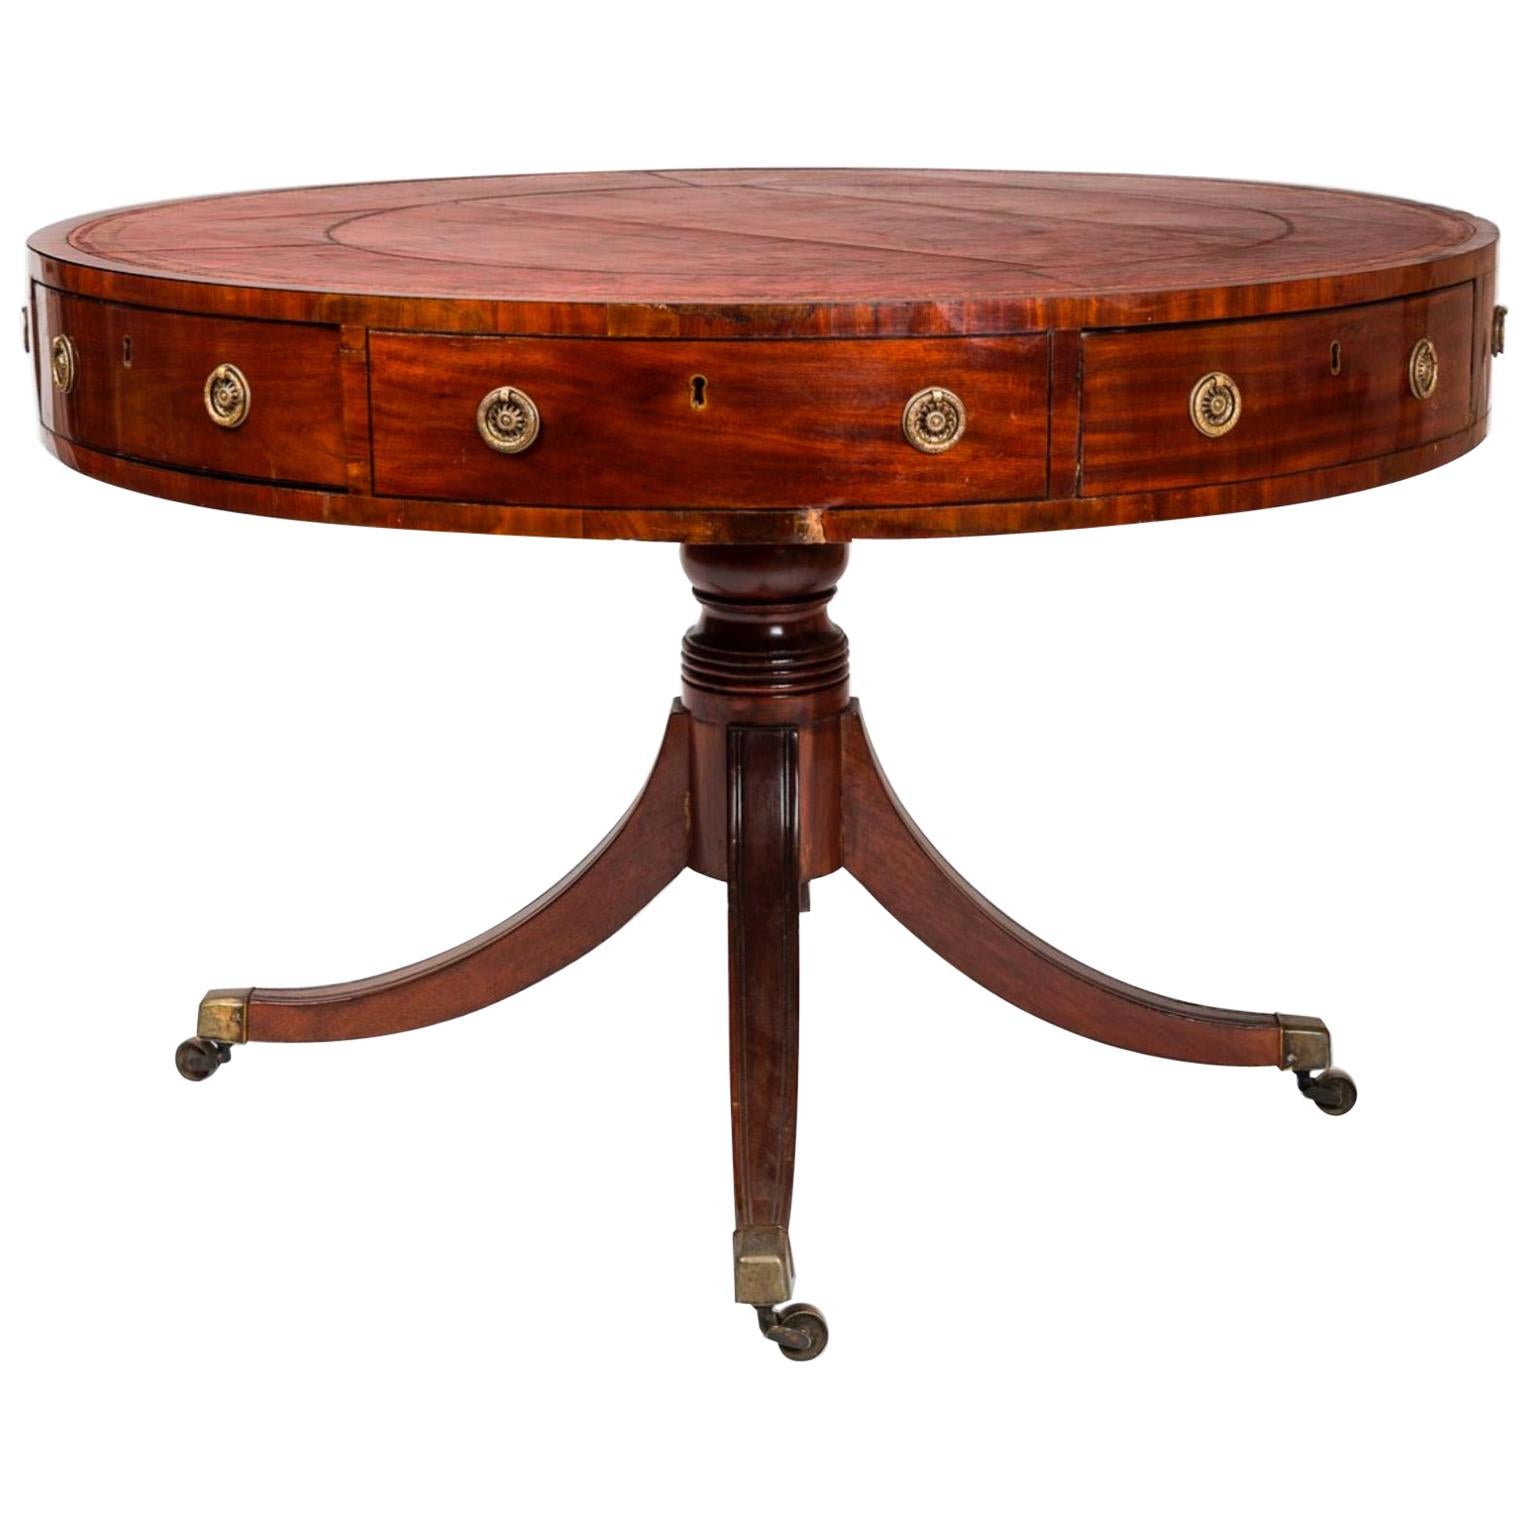 19th Century French Centre Pedestal Table in Mahogany and Red Leather Top